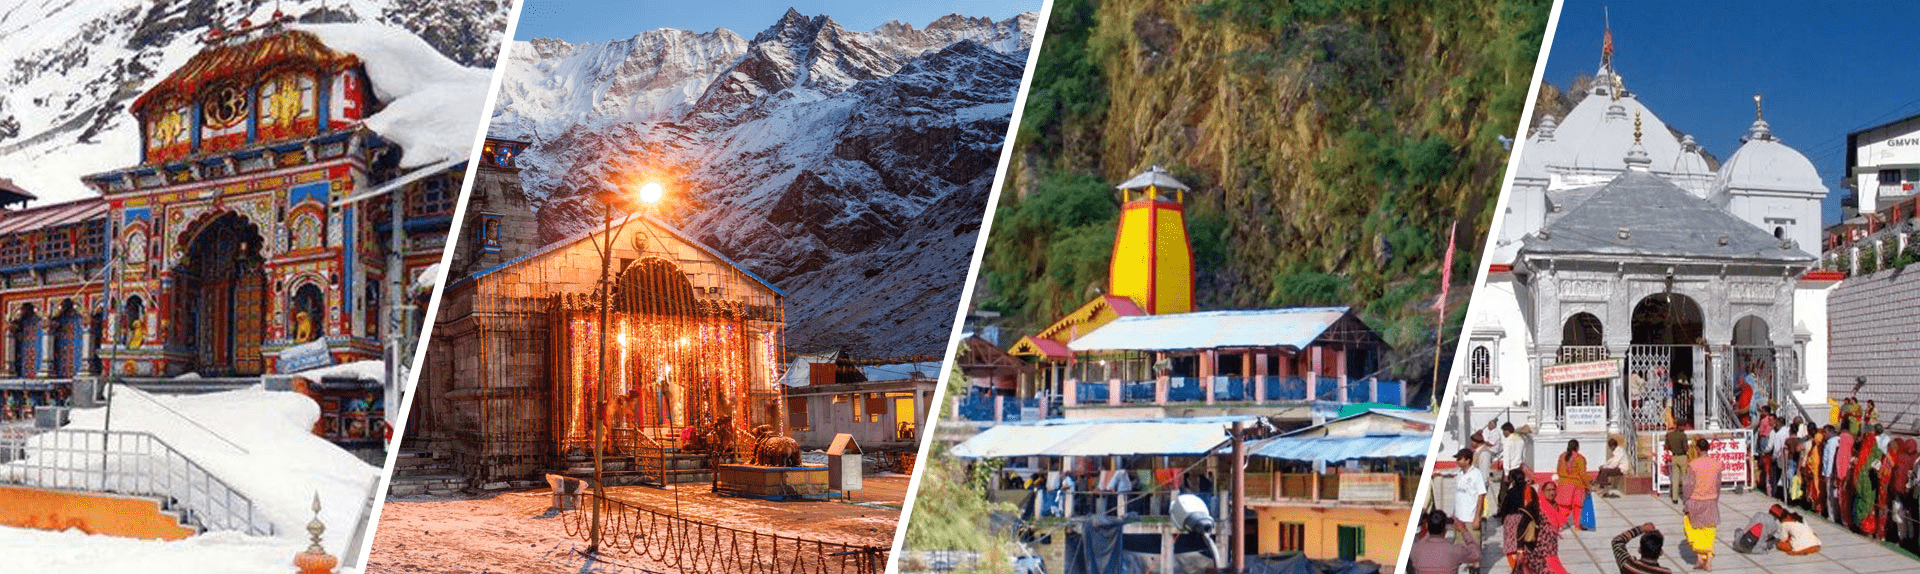 In the wake of rising coronavirus cases in India, the Chardham Yatra to the four famous Himalayan shrines in Uttarakhand has been postponed.